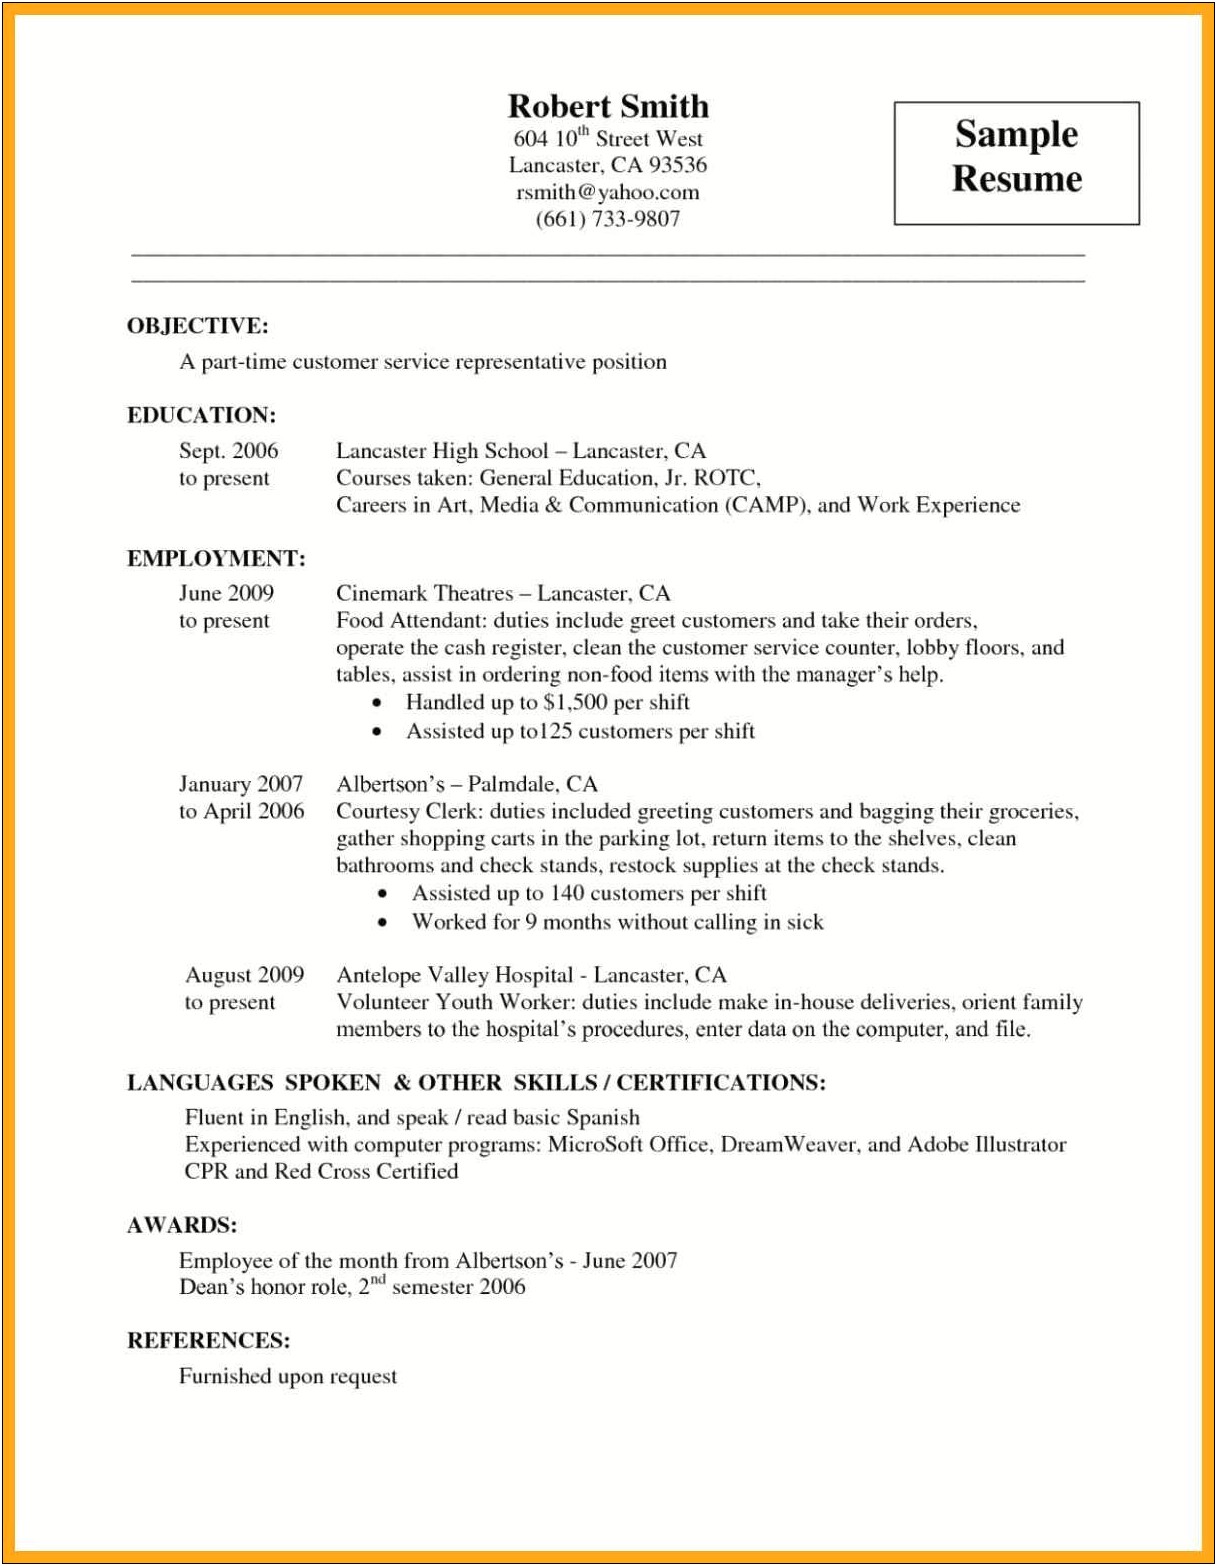 Free Resume For Gas Station Attendant